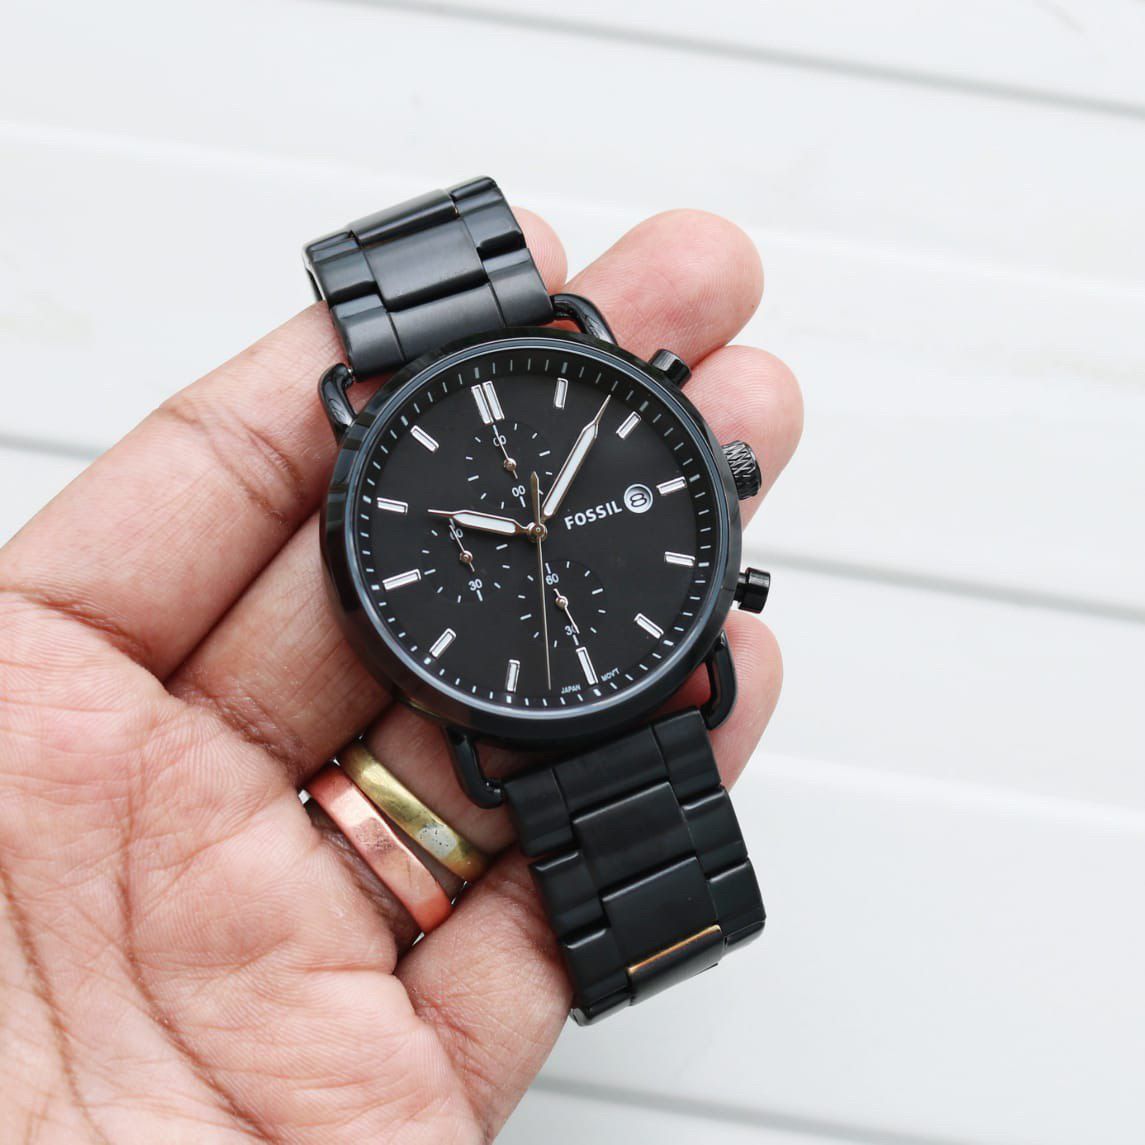 The Black Commuter Watch Imported